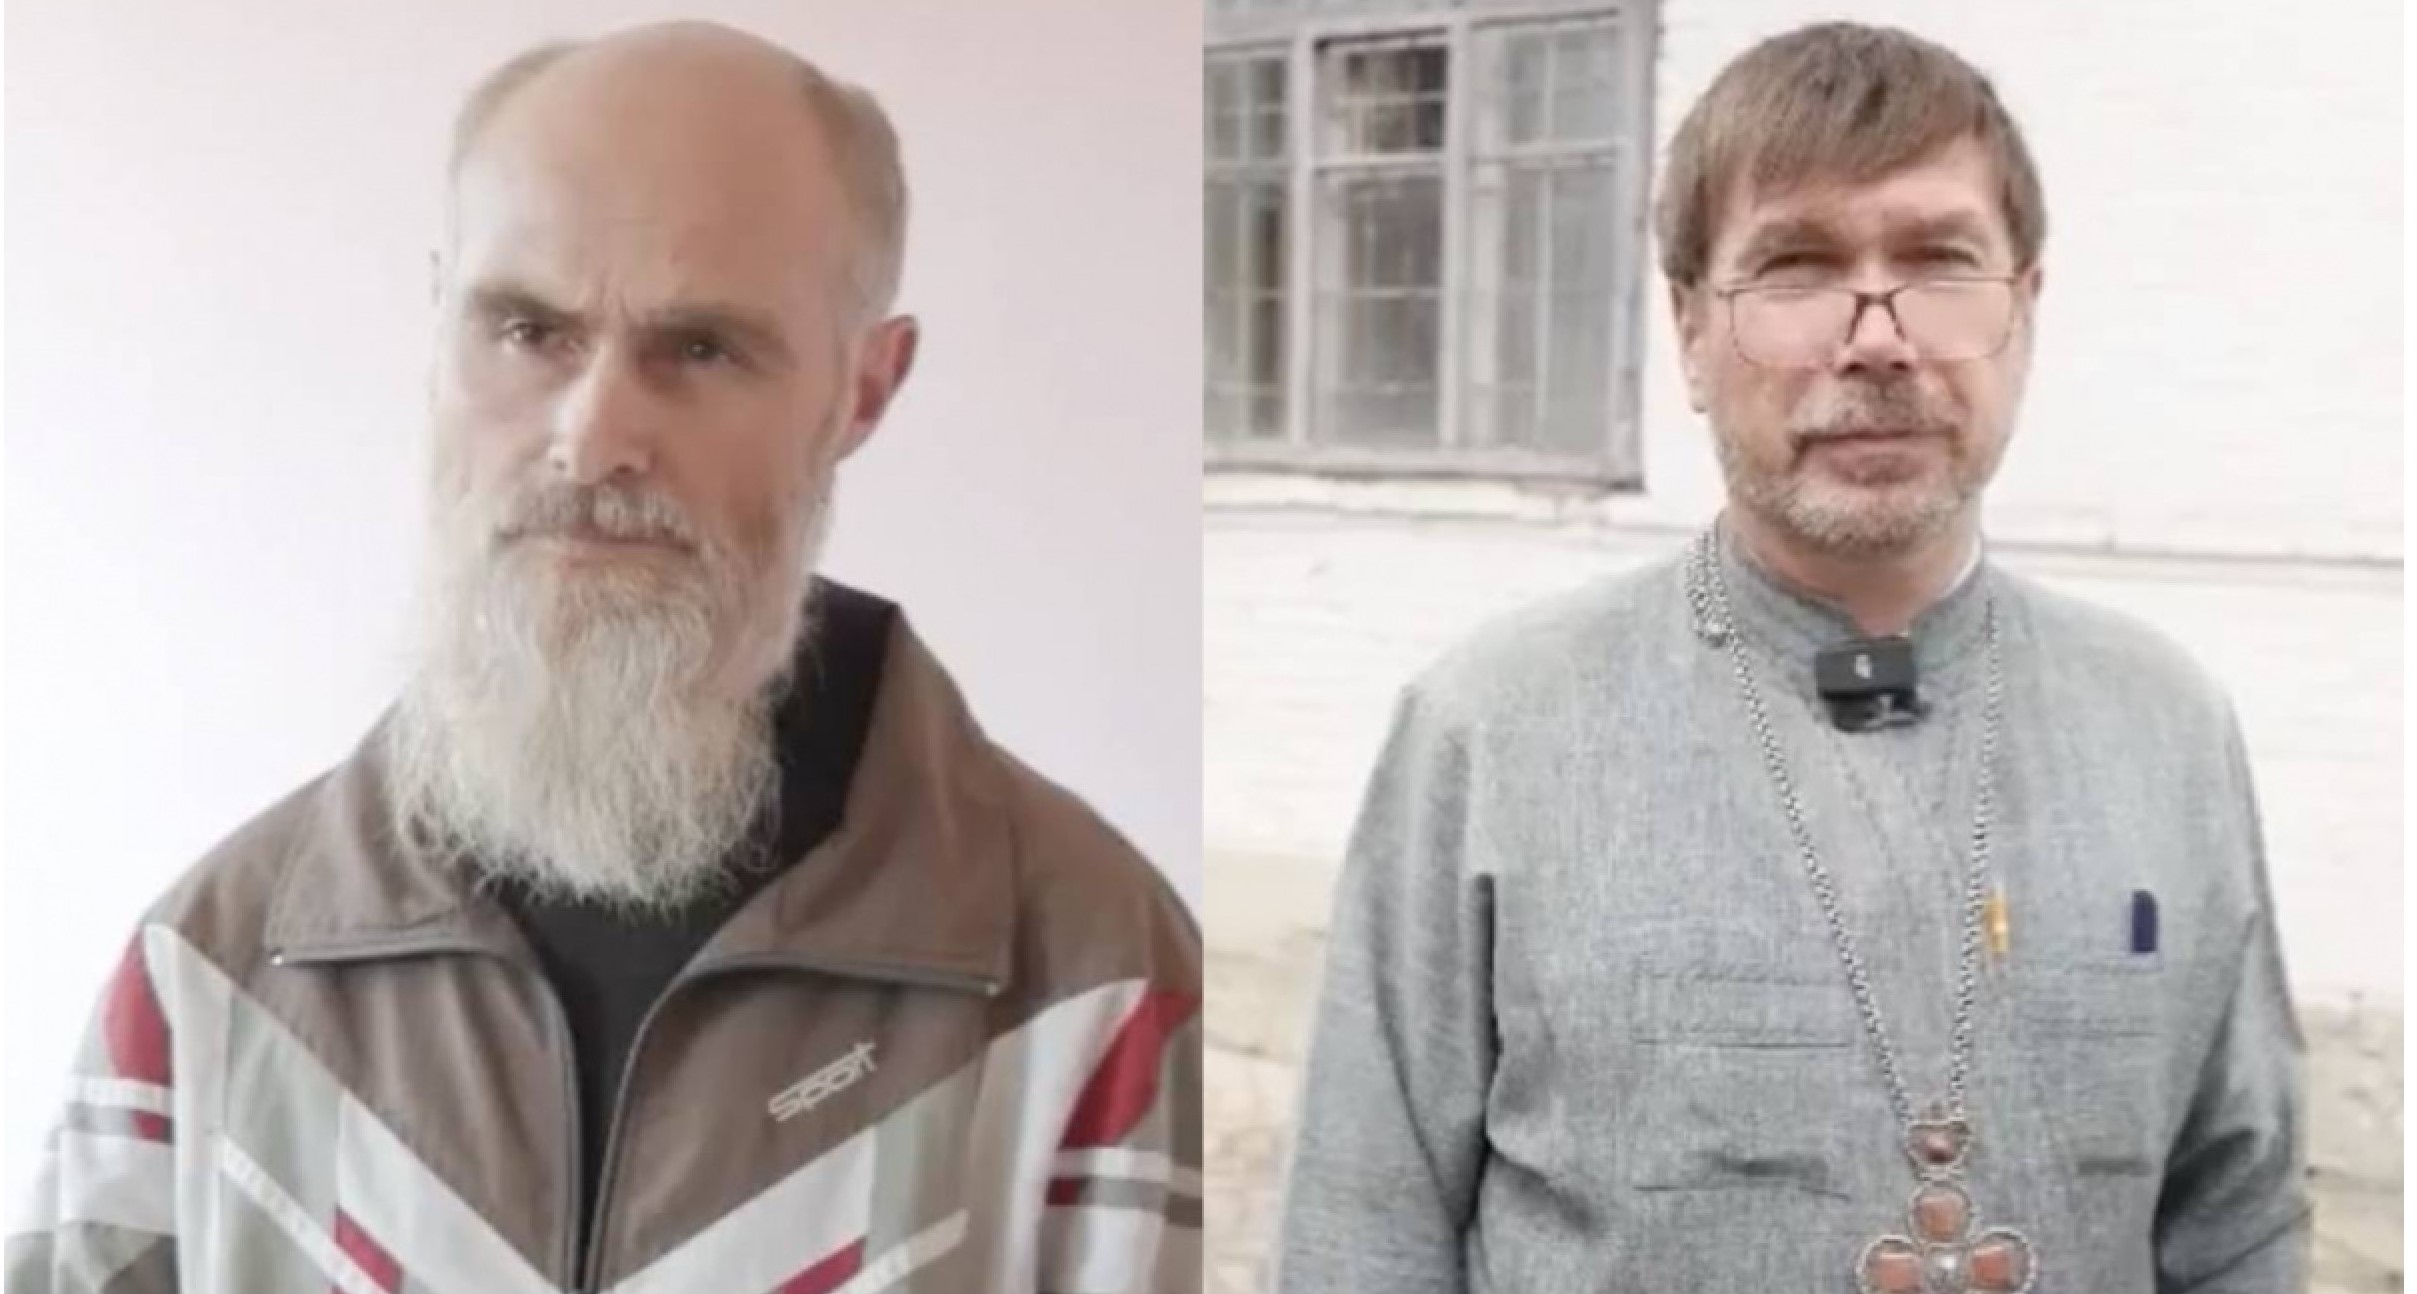 From left Father Khrystofor (Khrimli) and Father Andriy (Chuy) Photos posted by News of Donbas